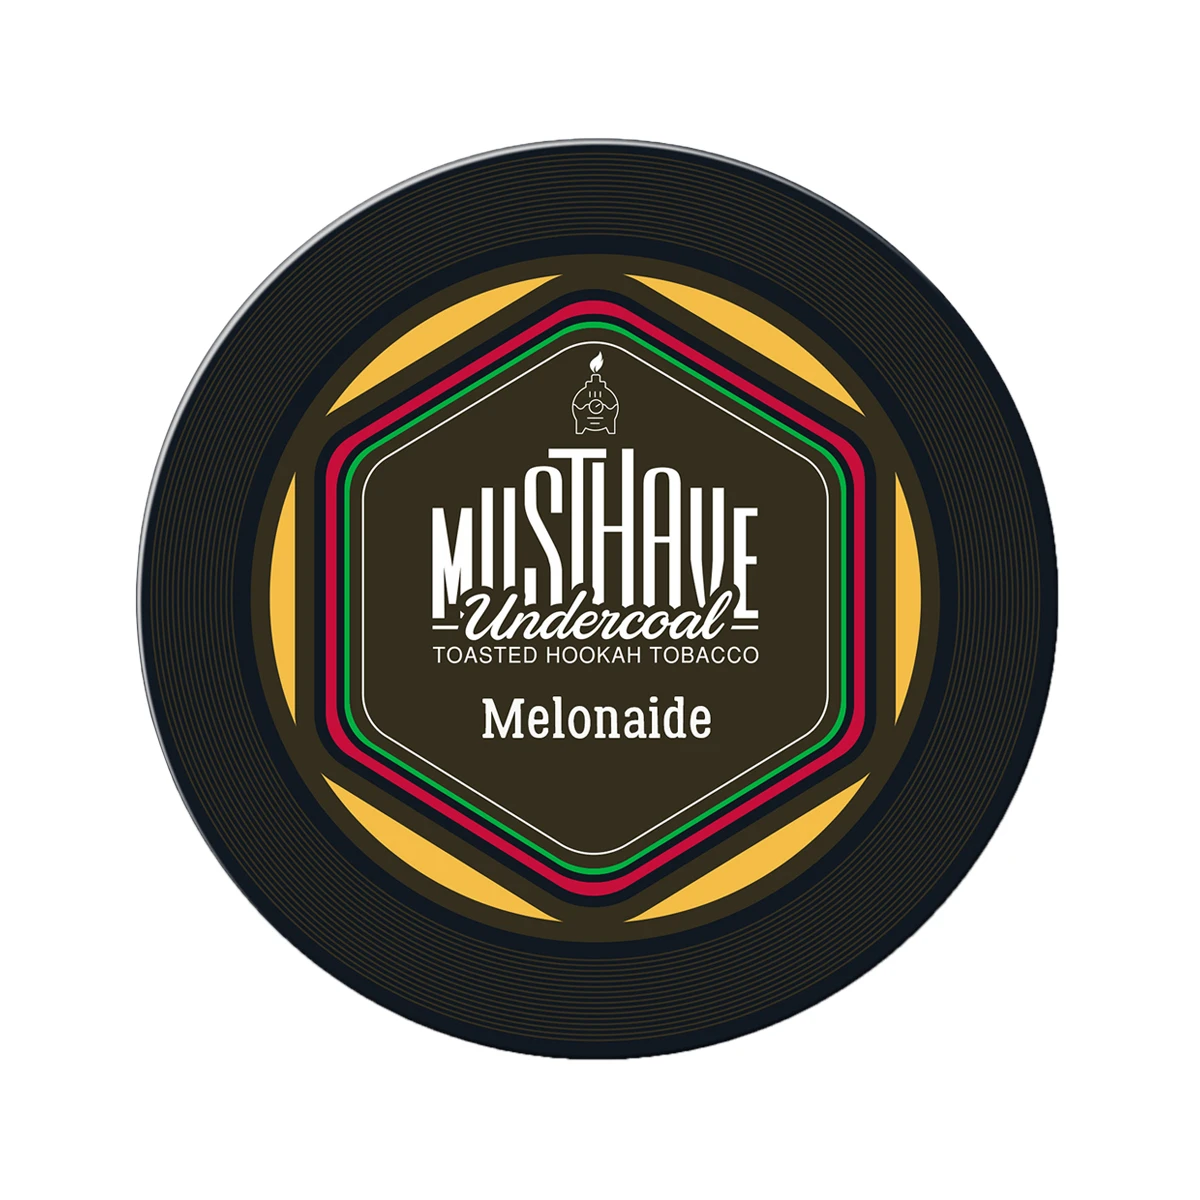 Musthave Tabak 25g Melonade